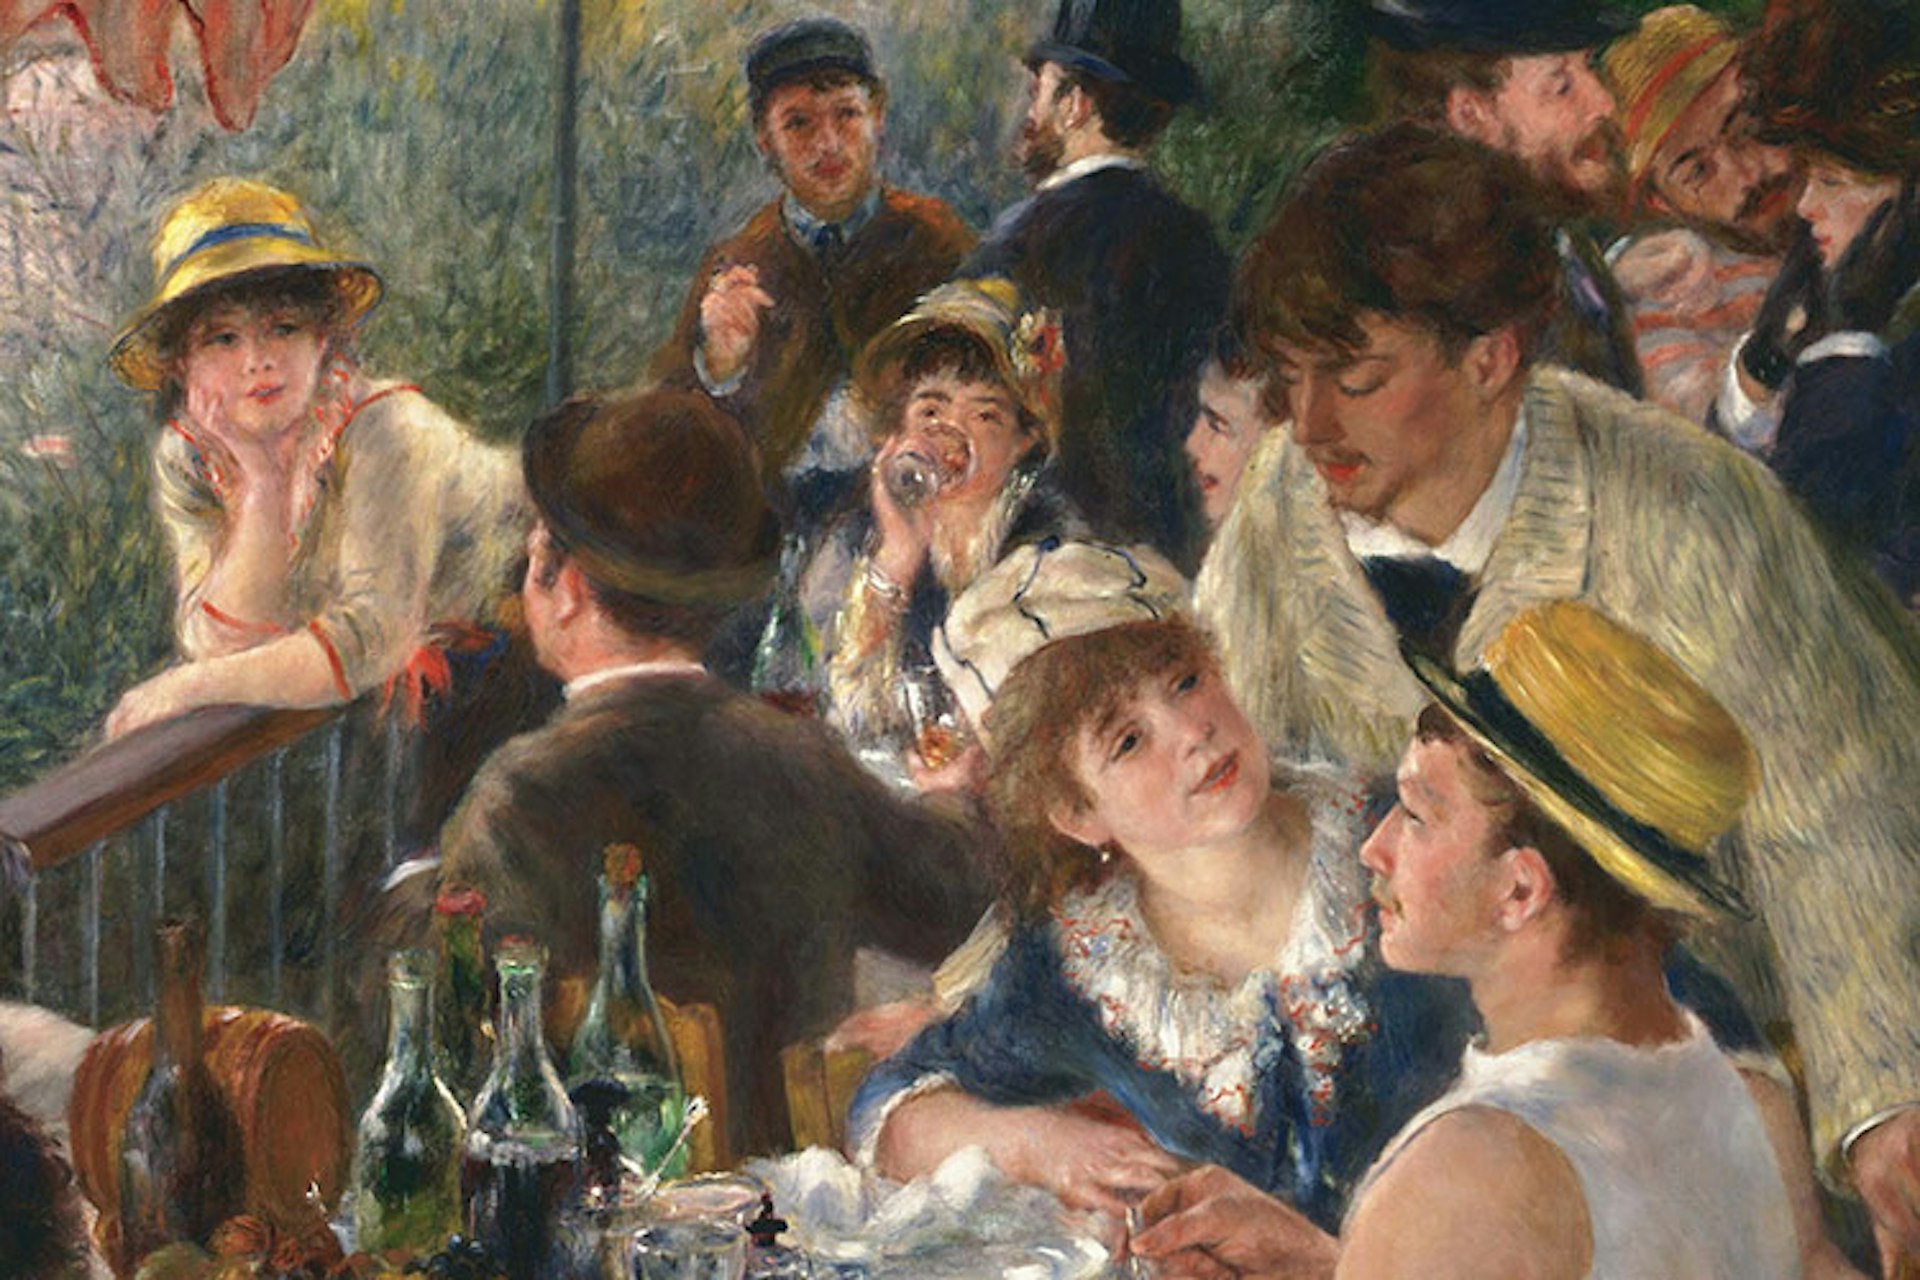 A detail from Renoir's Luncheon of the Boating Party, the painting that entranced the title character of hit French film Amelie. Image from Wikimedia Commons